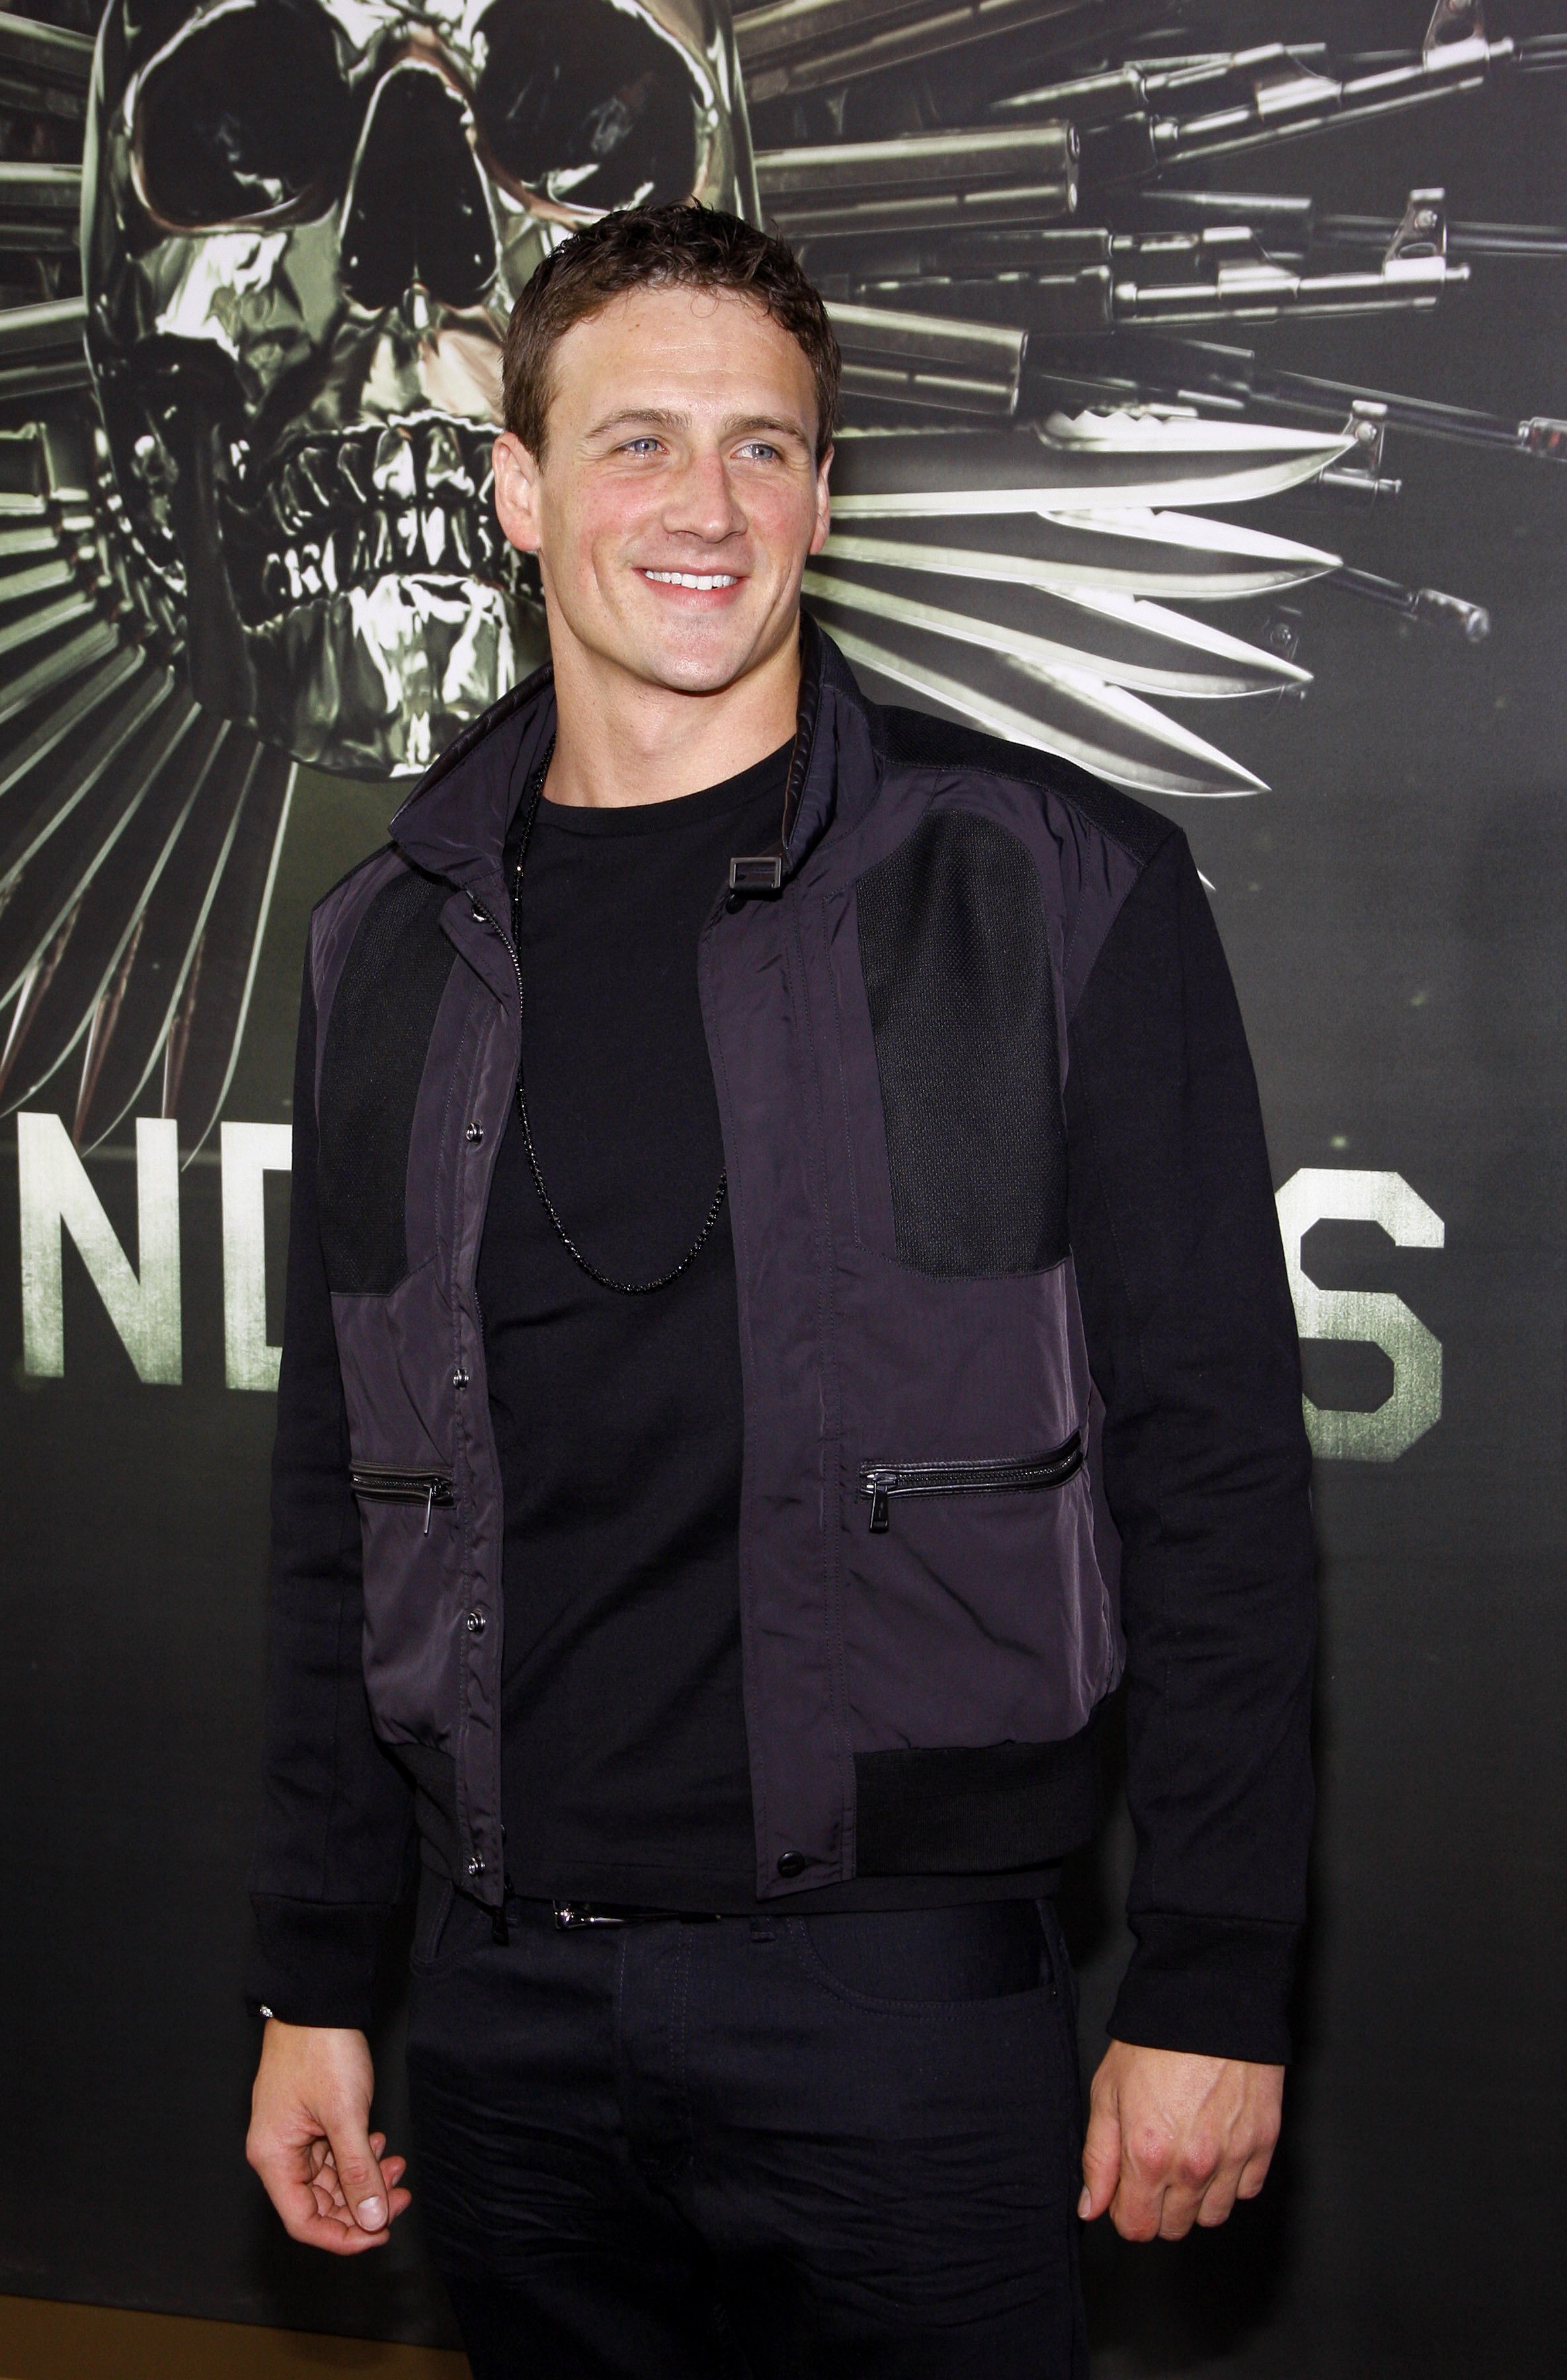 Ryan Lochte was at the premiere of "Expendables 2" at the Grauman's Chinese Theatre in Los Angeles in 2012. | Photo: Shutterstock.